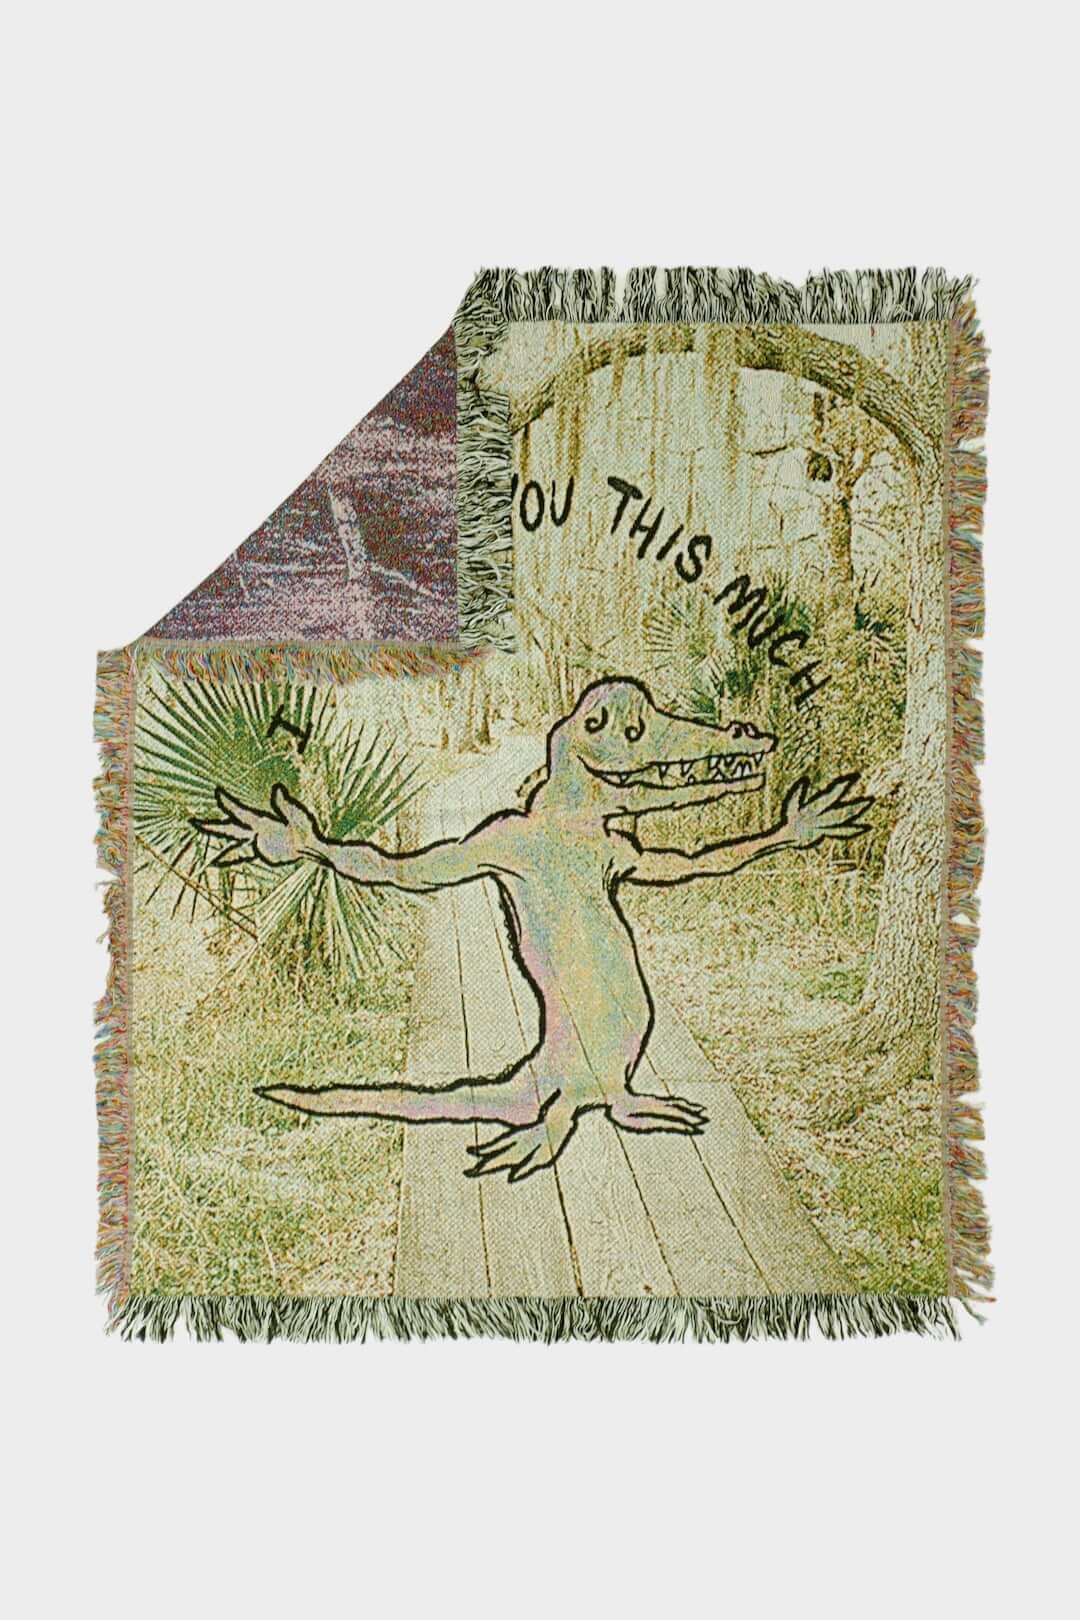 I Love You This Much Gator Throw - Blanket - DNO